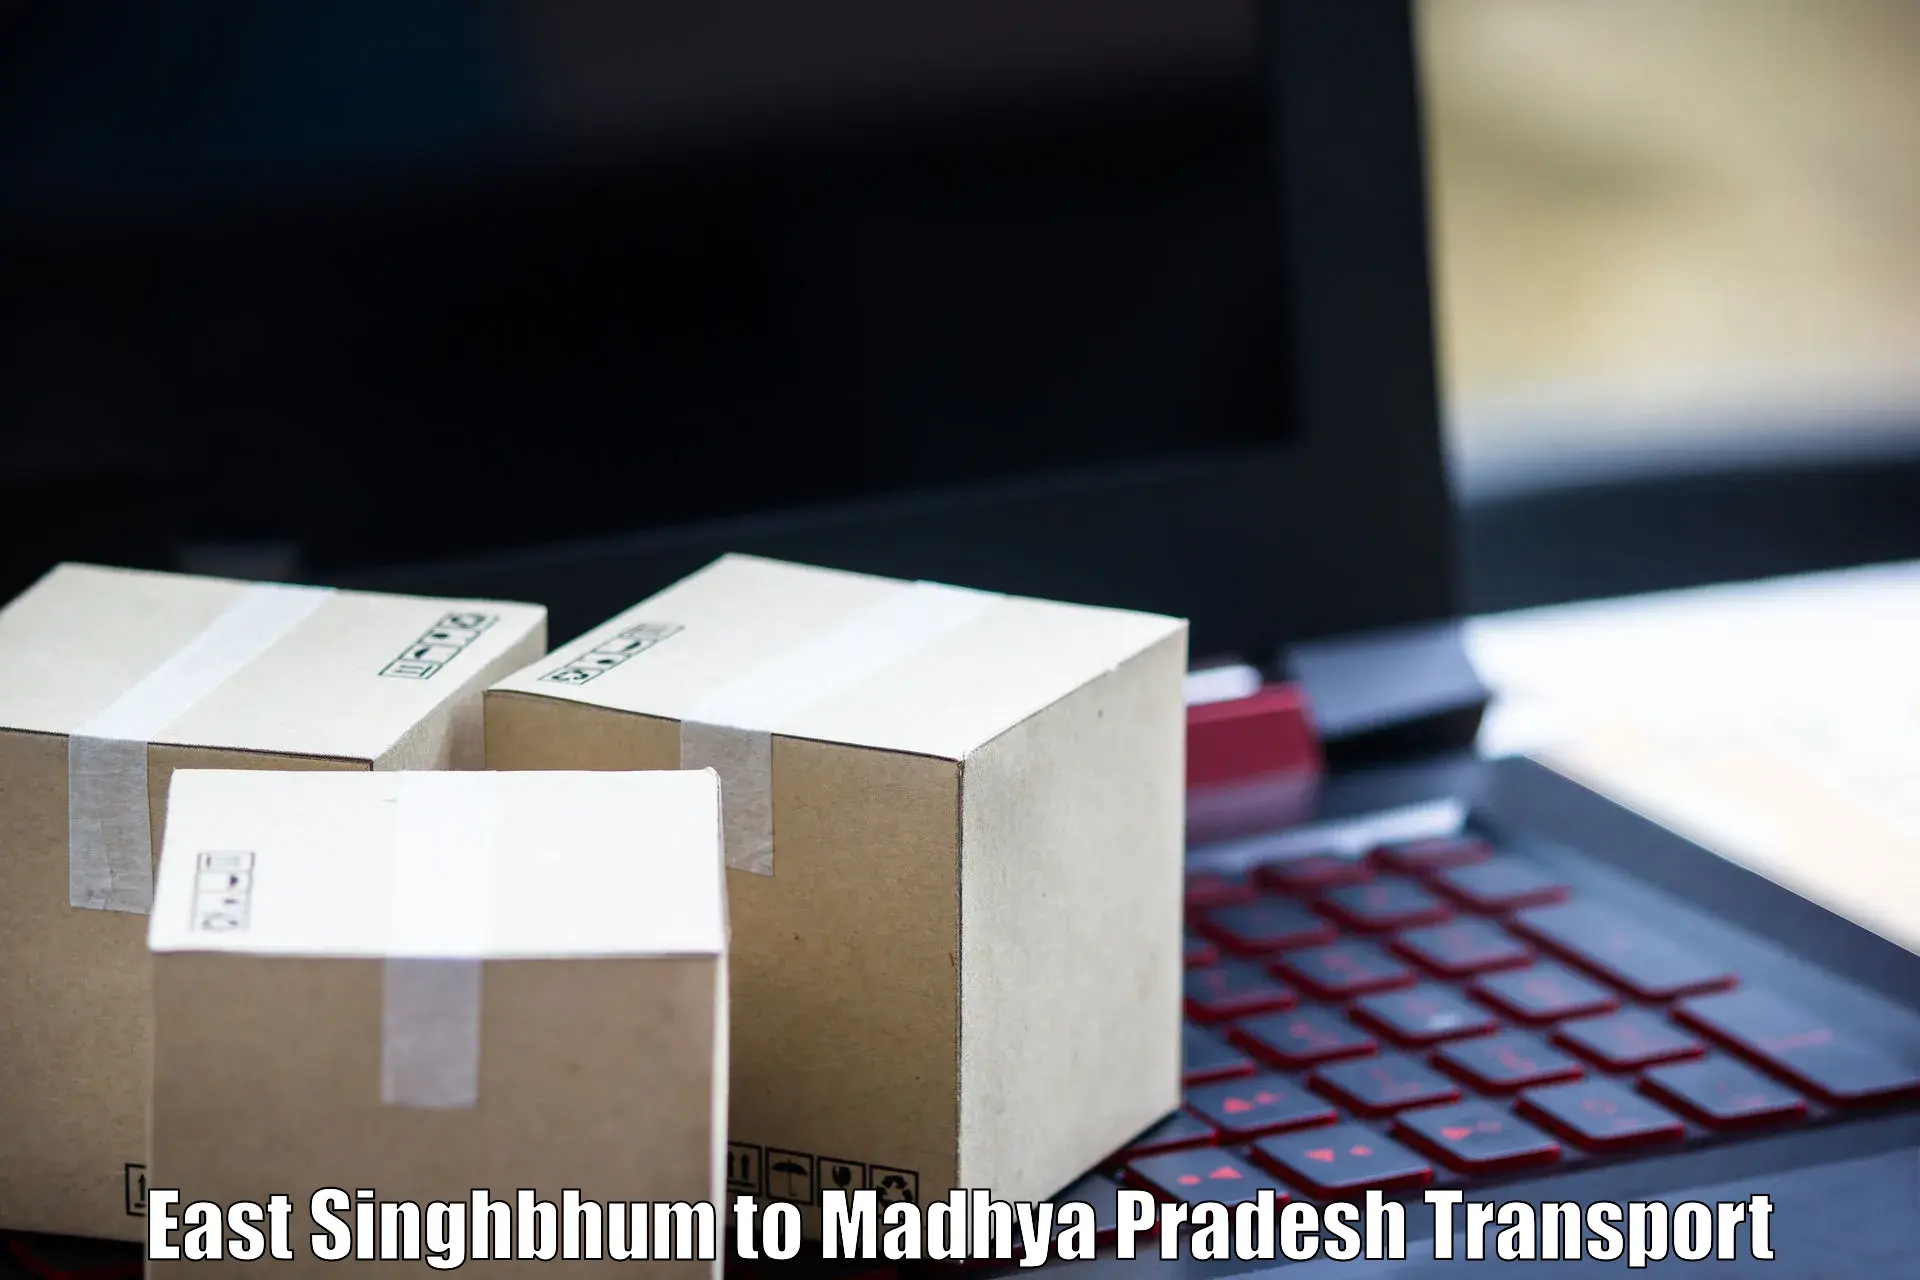 Container transportation services East Singhbhum to Petlawad